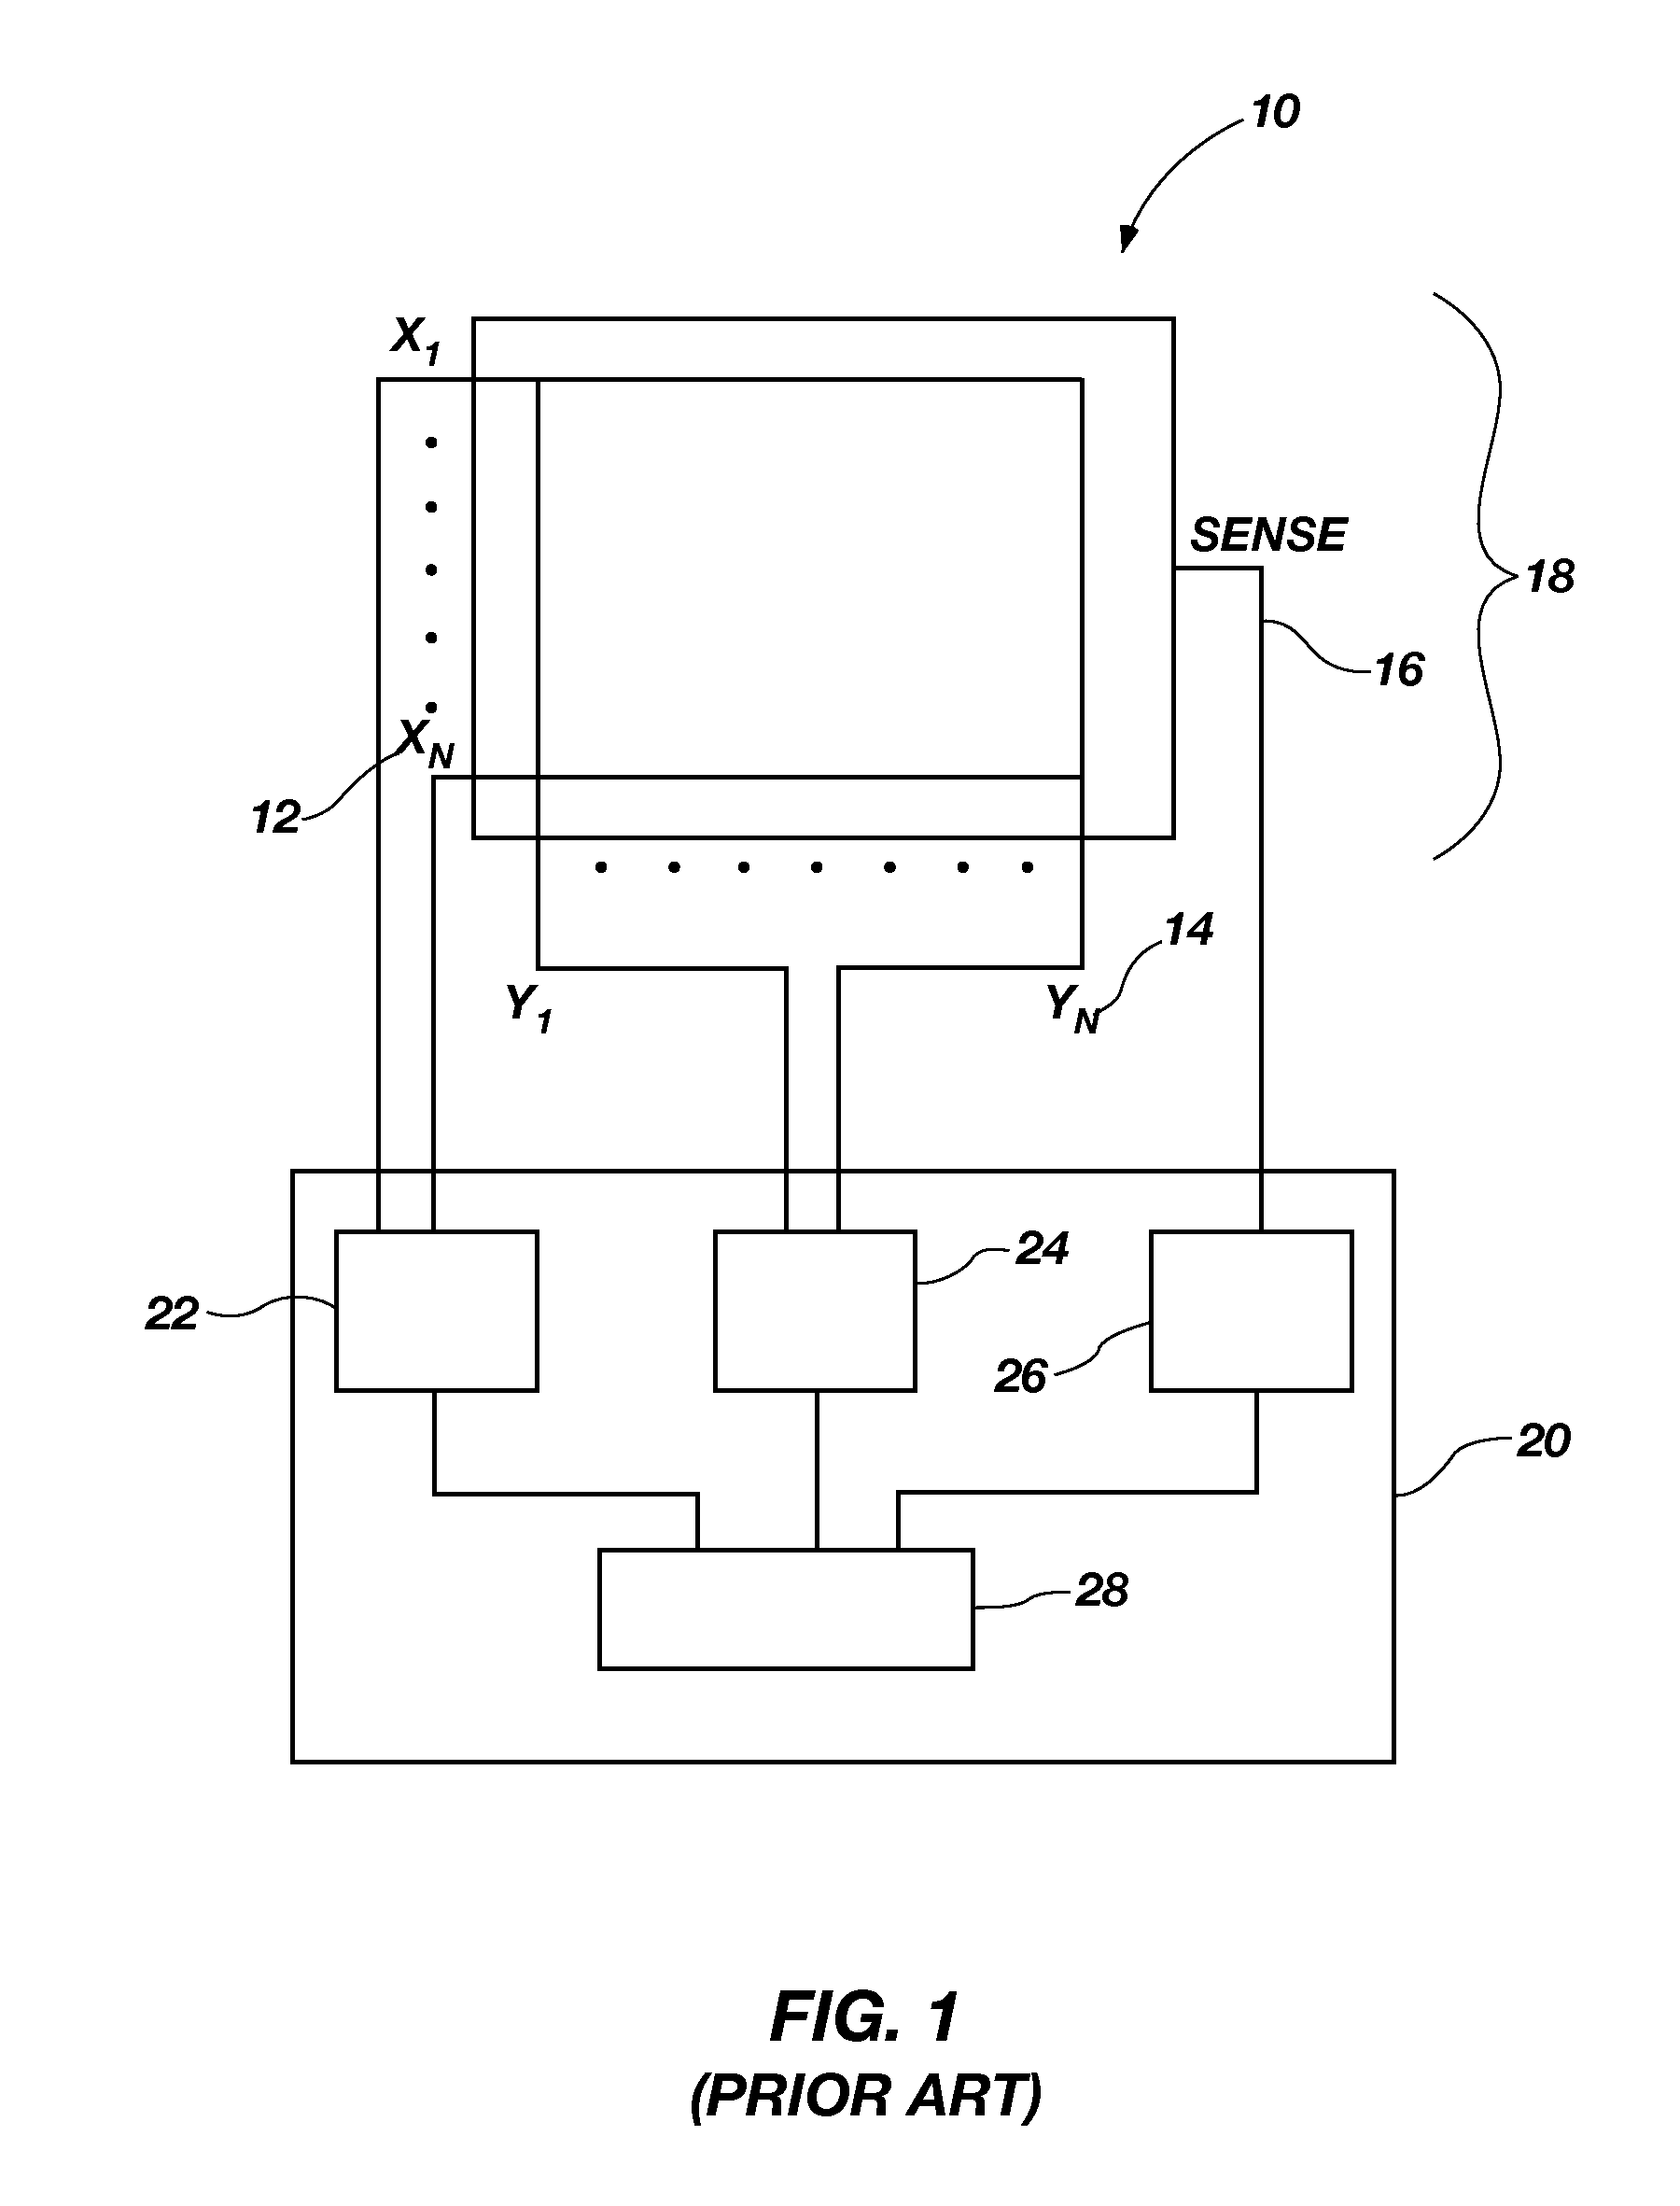 Capacitive touchpad capable of operating in a single surface tracking mode and a button mode with reduced surface tracking capability